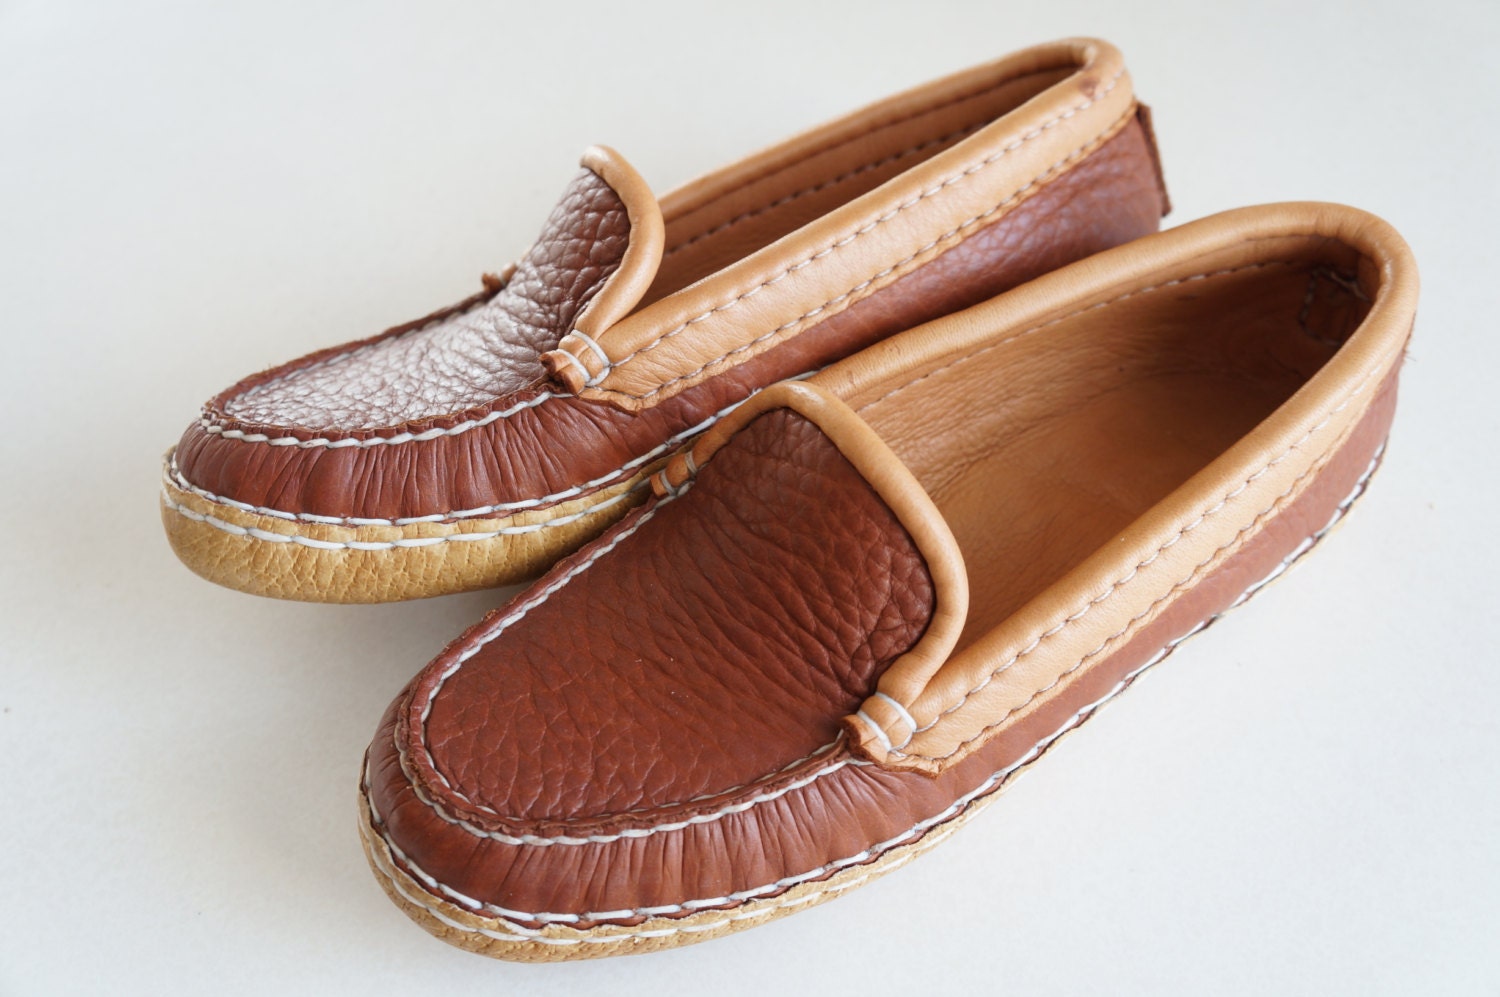 Cherokee Bison Leather Moccasins by BuckskinLeather on Etsy